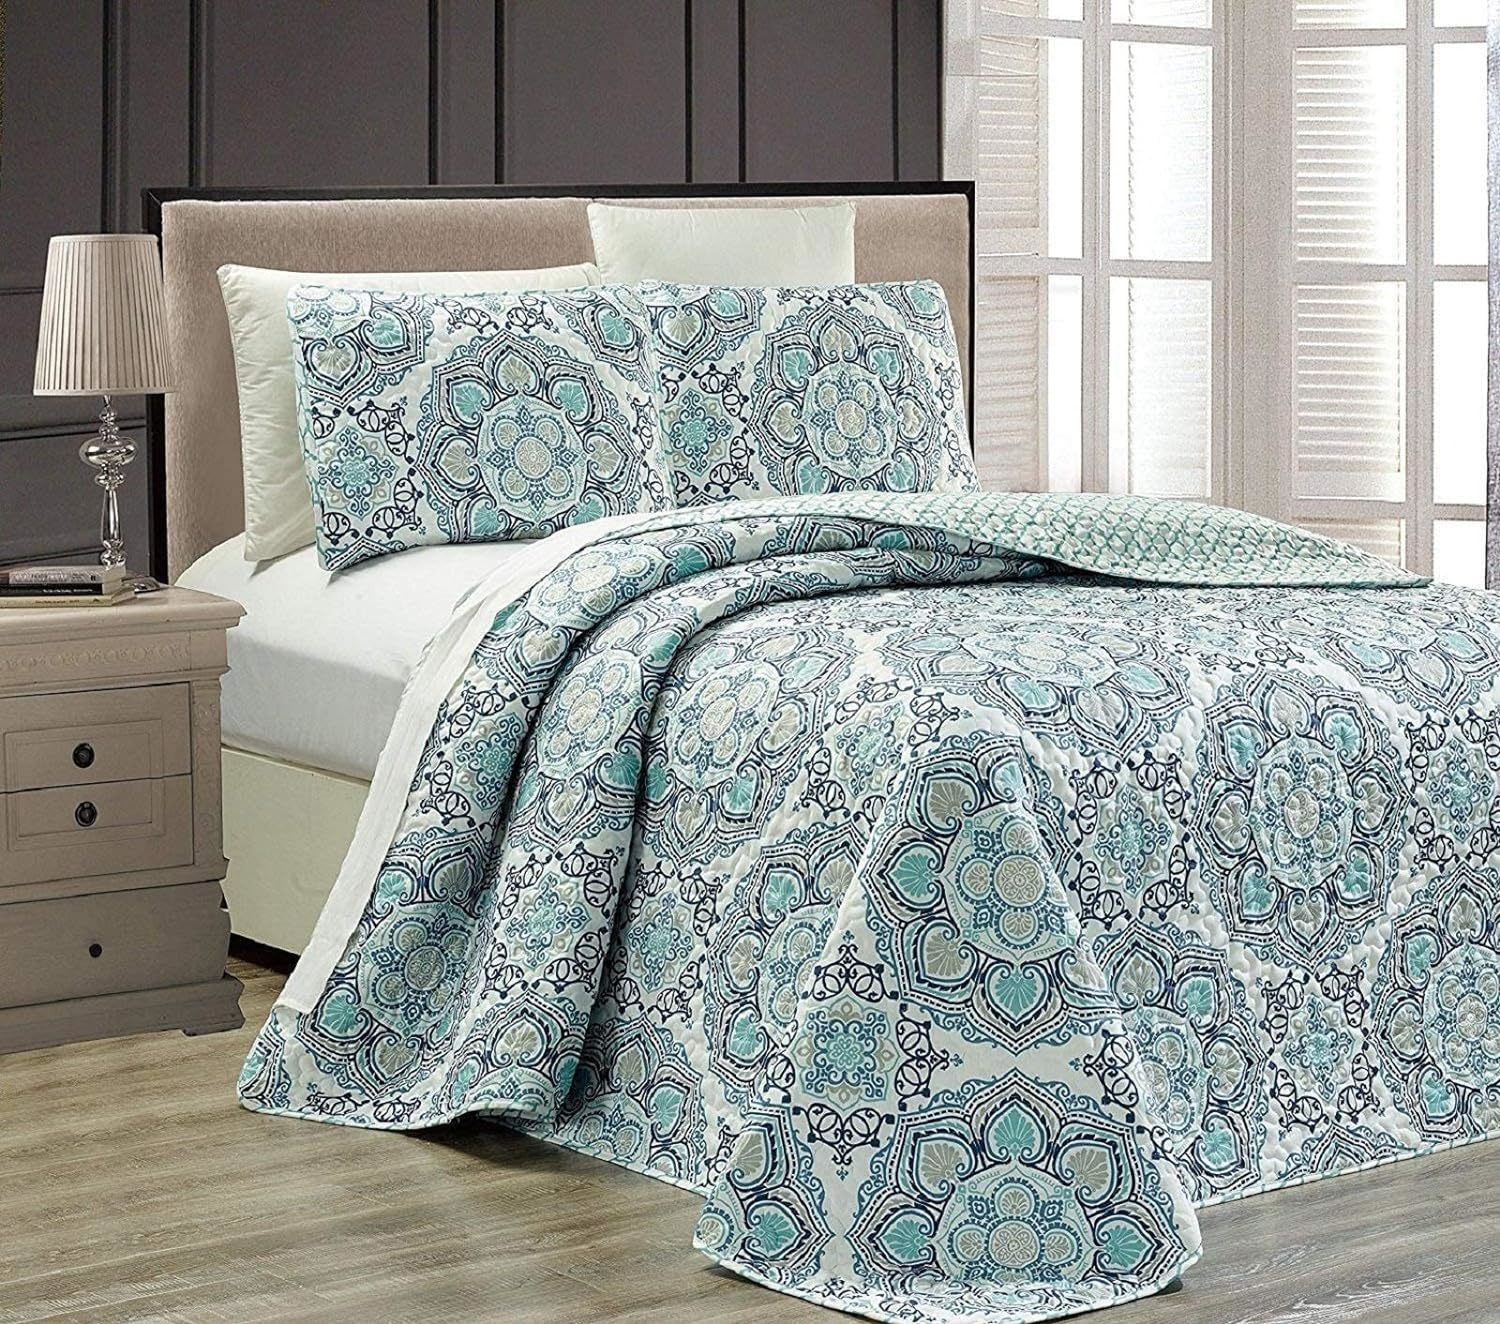 Primary image for New Linen Plus Full/Queen 3 Pc. Reversible Oversized Bedspread Set Medallion